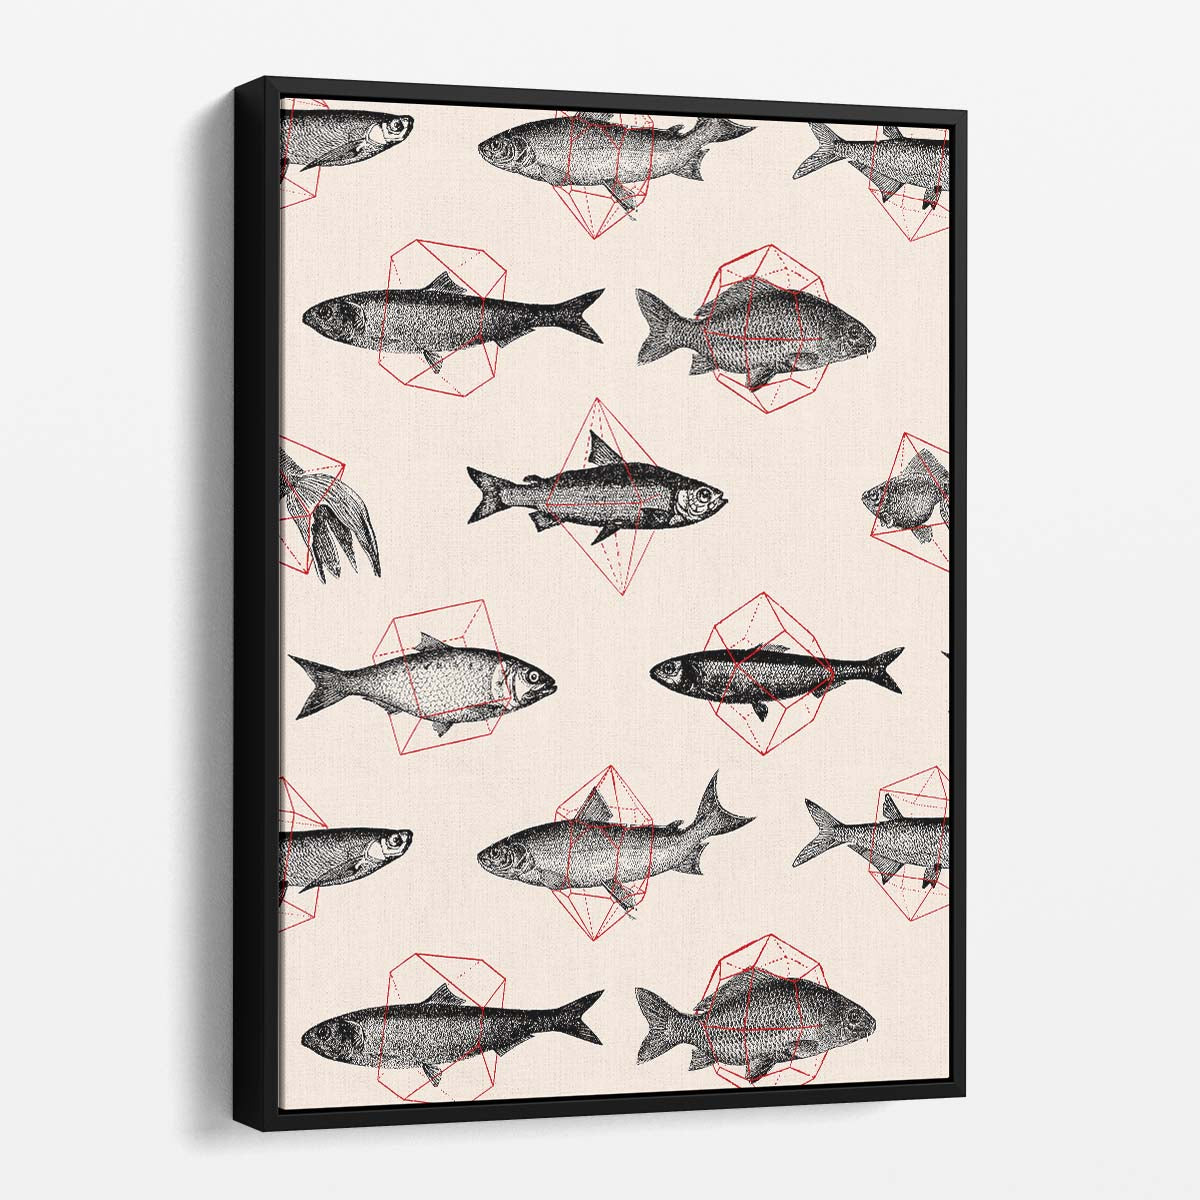 Geometric Fish Illustration, Abstract Animal Wall Art on White Background by Luxuriance Designs, made in USA